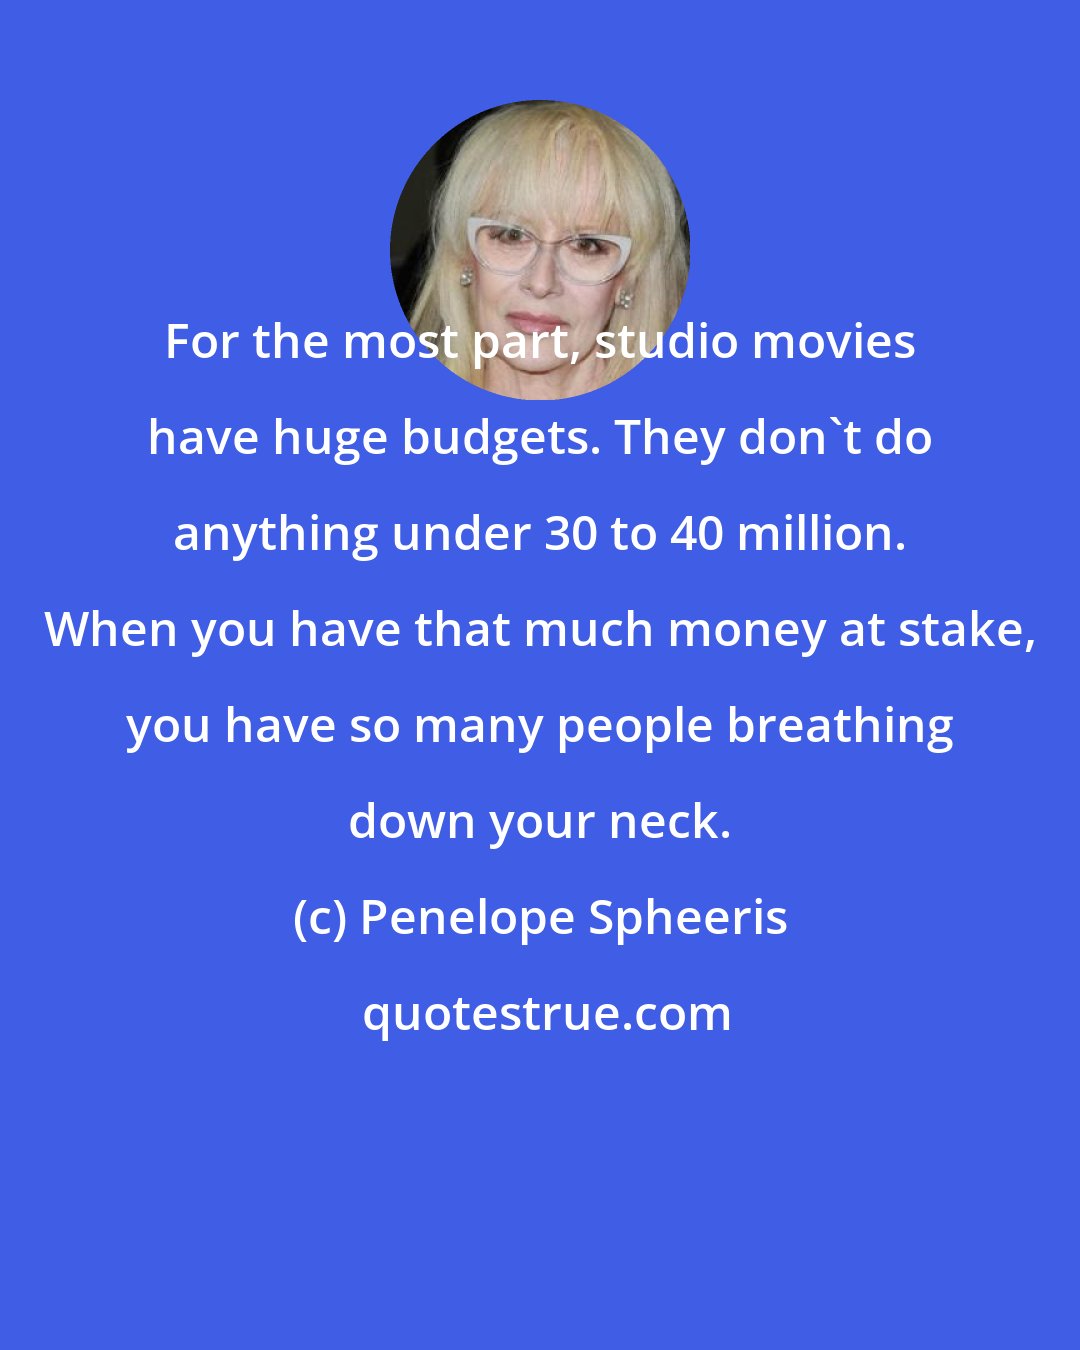 Penelope Spheeris: For the most part, studio movies have huge budgets. They don't do anything under 30 to 40 million. When you have that much money at stake, you have so many people breathing down your neck.